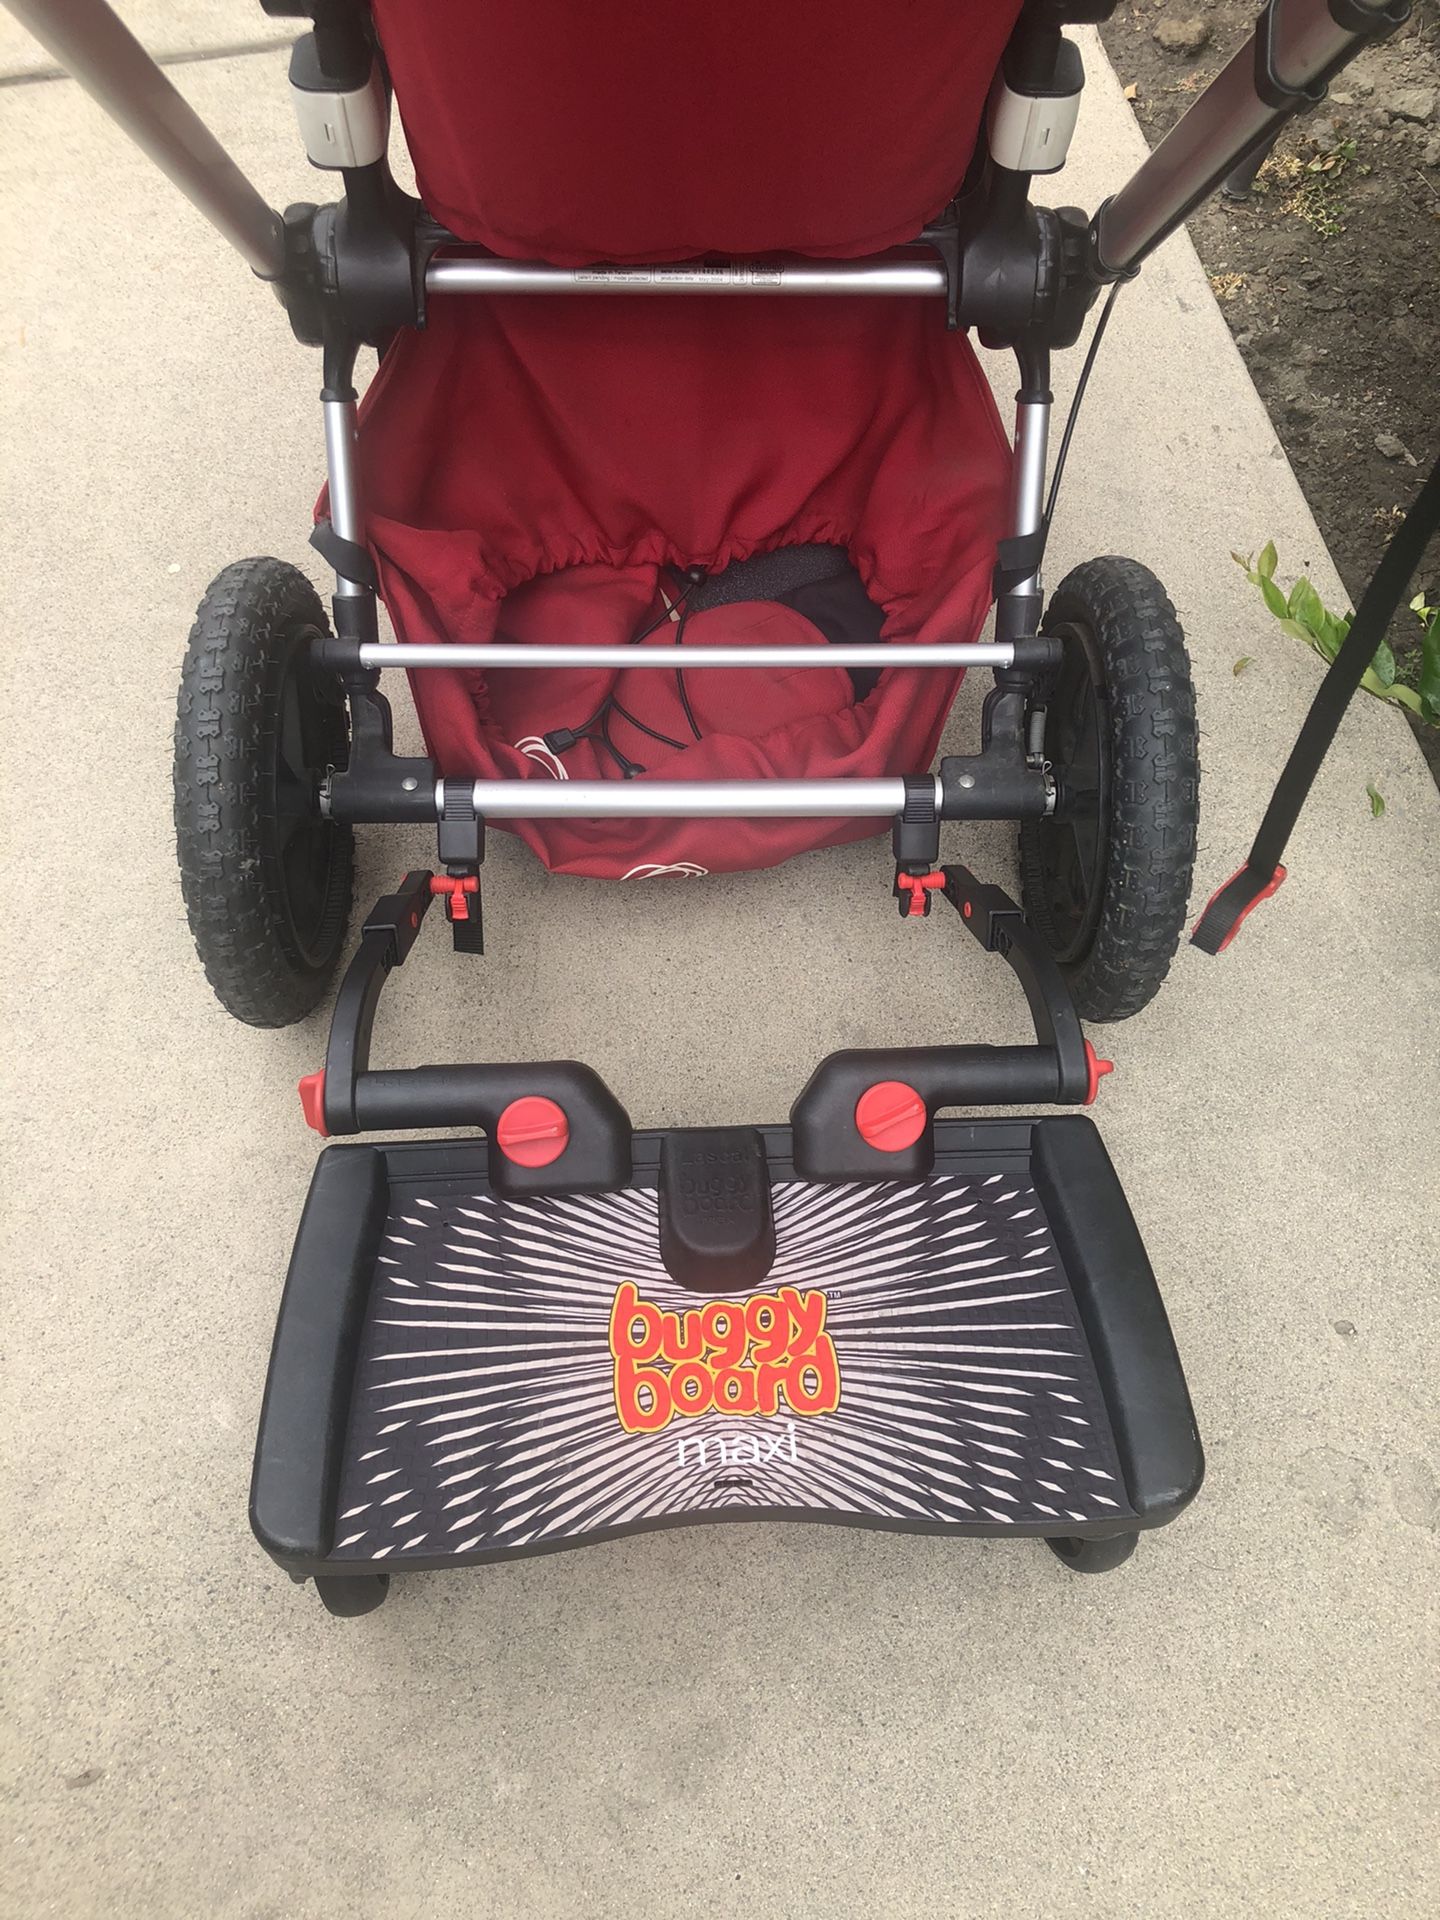 Bugaboo Stroller w/matching backpack